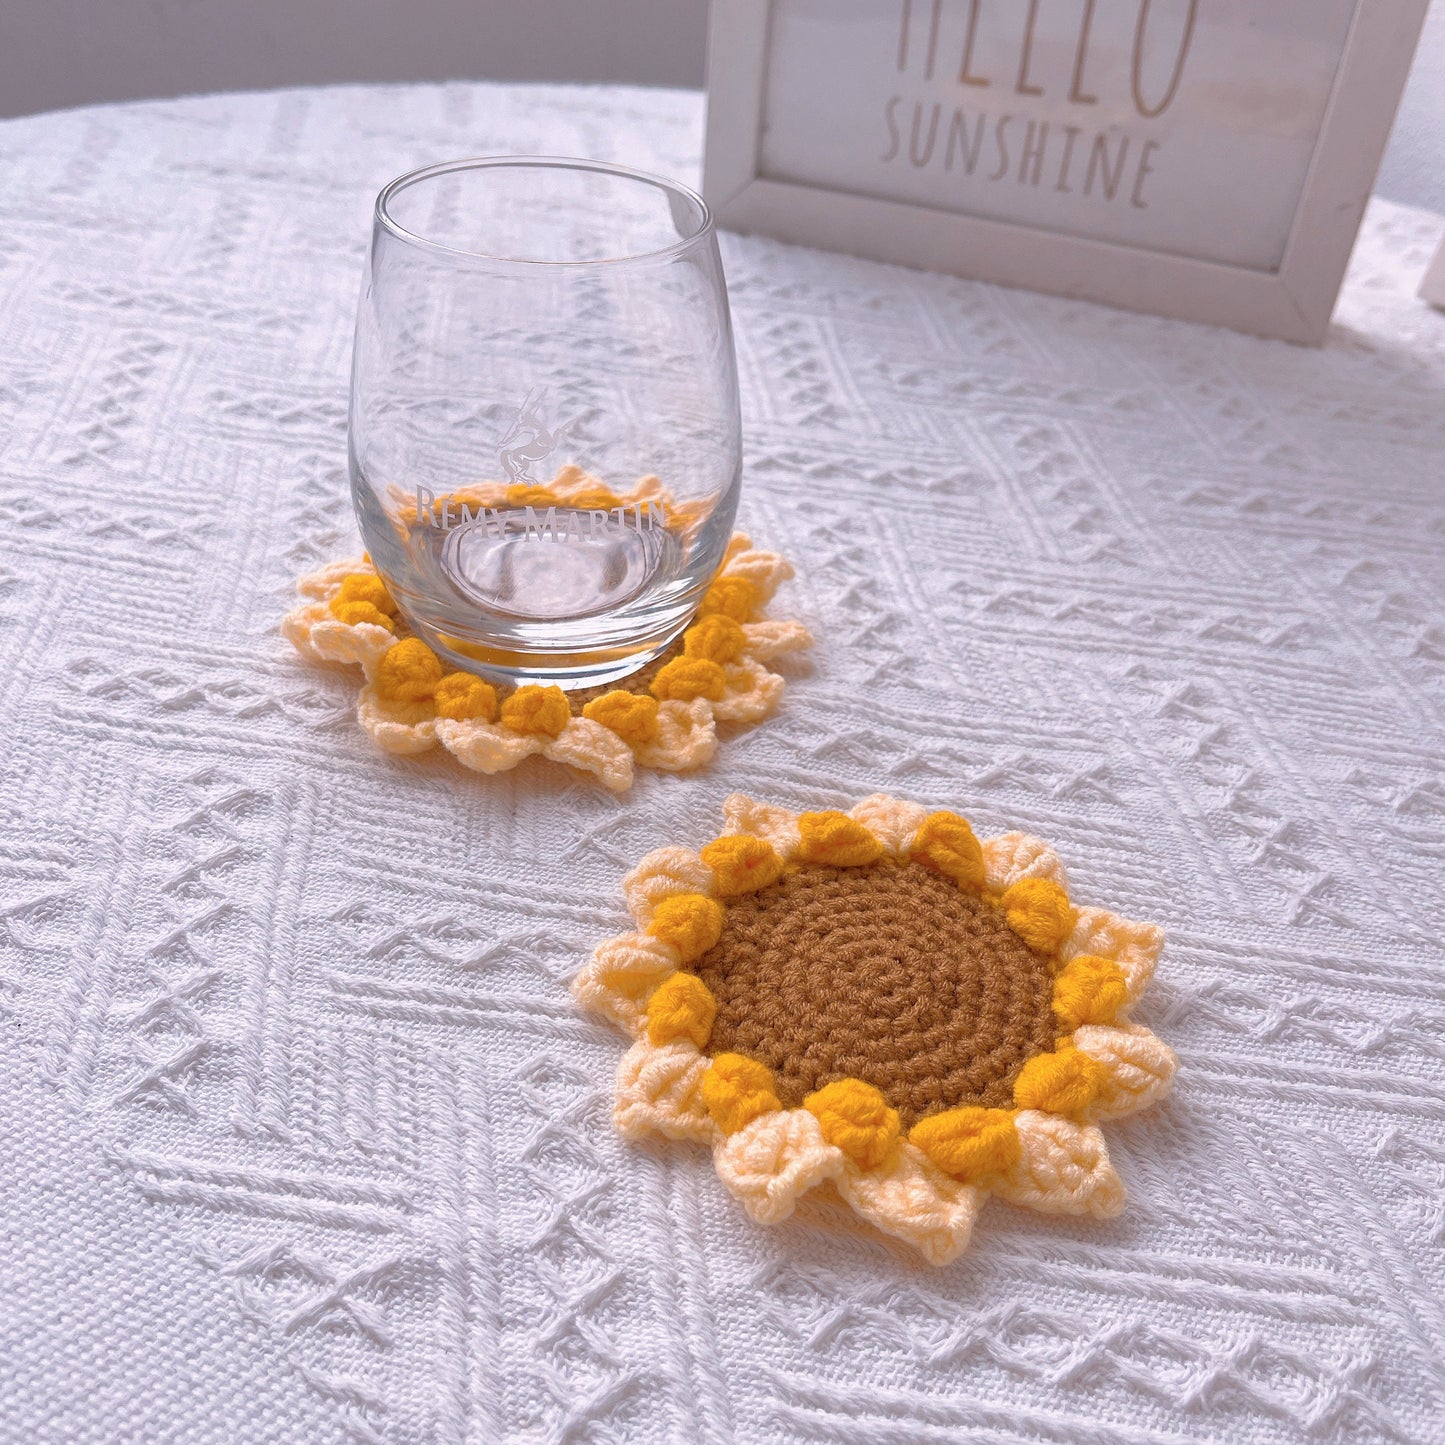 Handmade Crochet Sunflower Coaster in a Basket Set - Drink Mats, Table Protection, Kitchen Accessories, Housewarming Gift, Coasters Pot